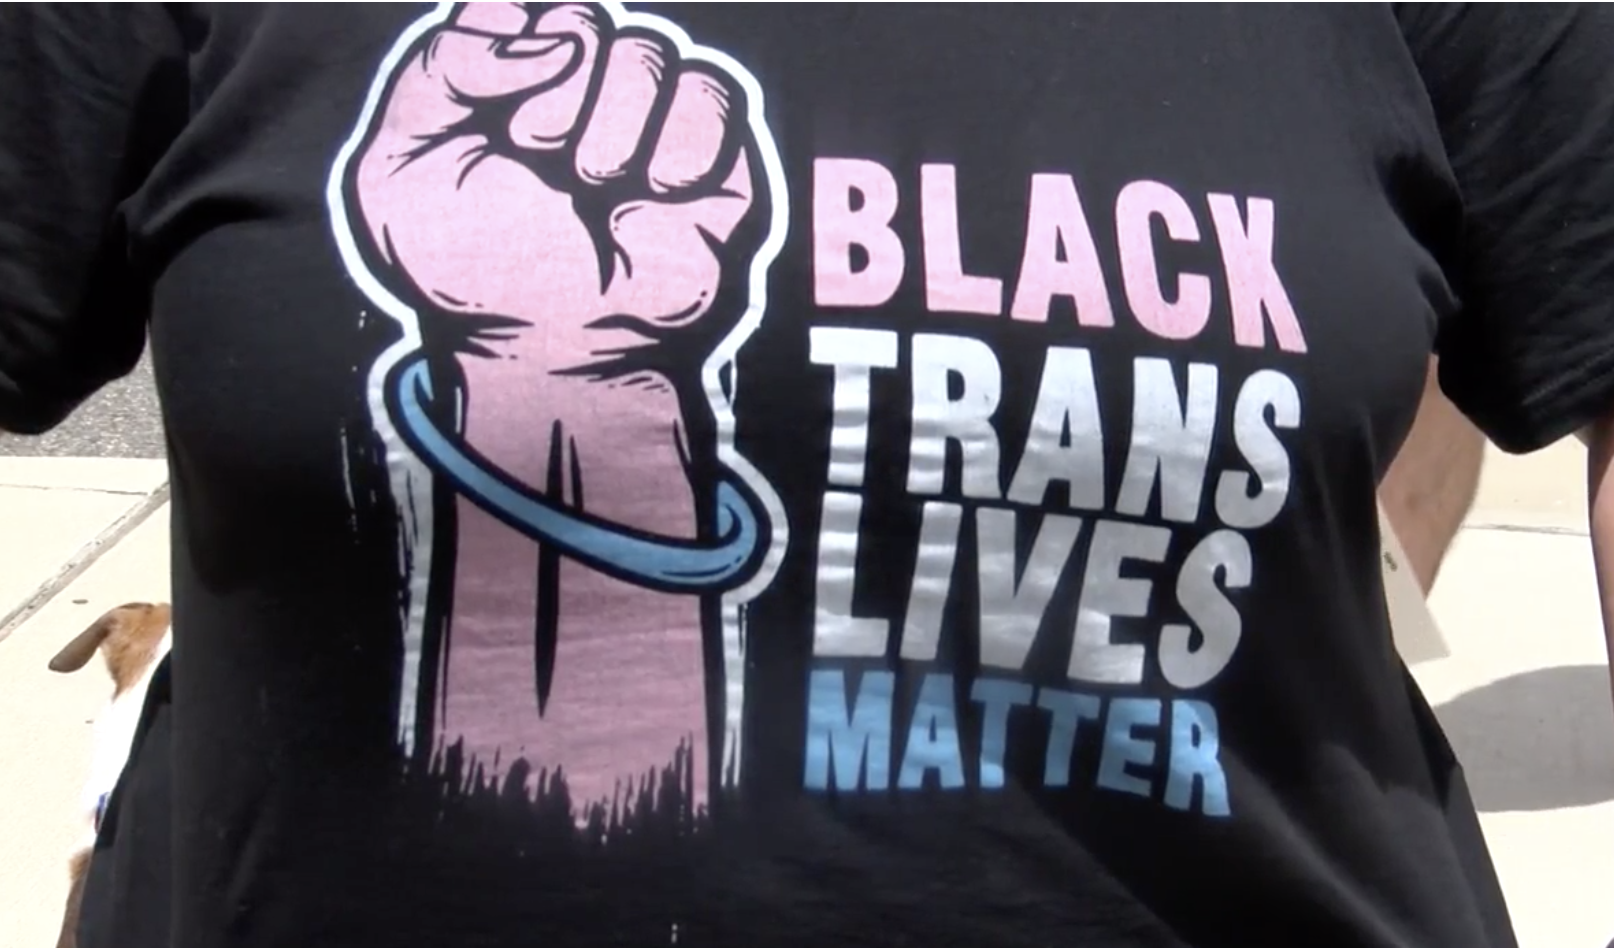 ‘Do You See Us’ LGBTQ+ rally march focuses on Black Trans Lives Matter and give list of demands for change